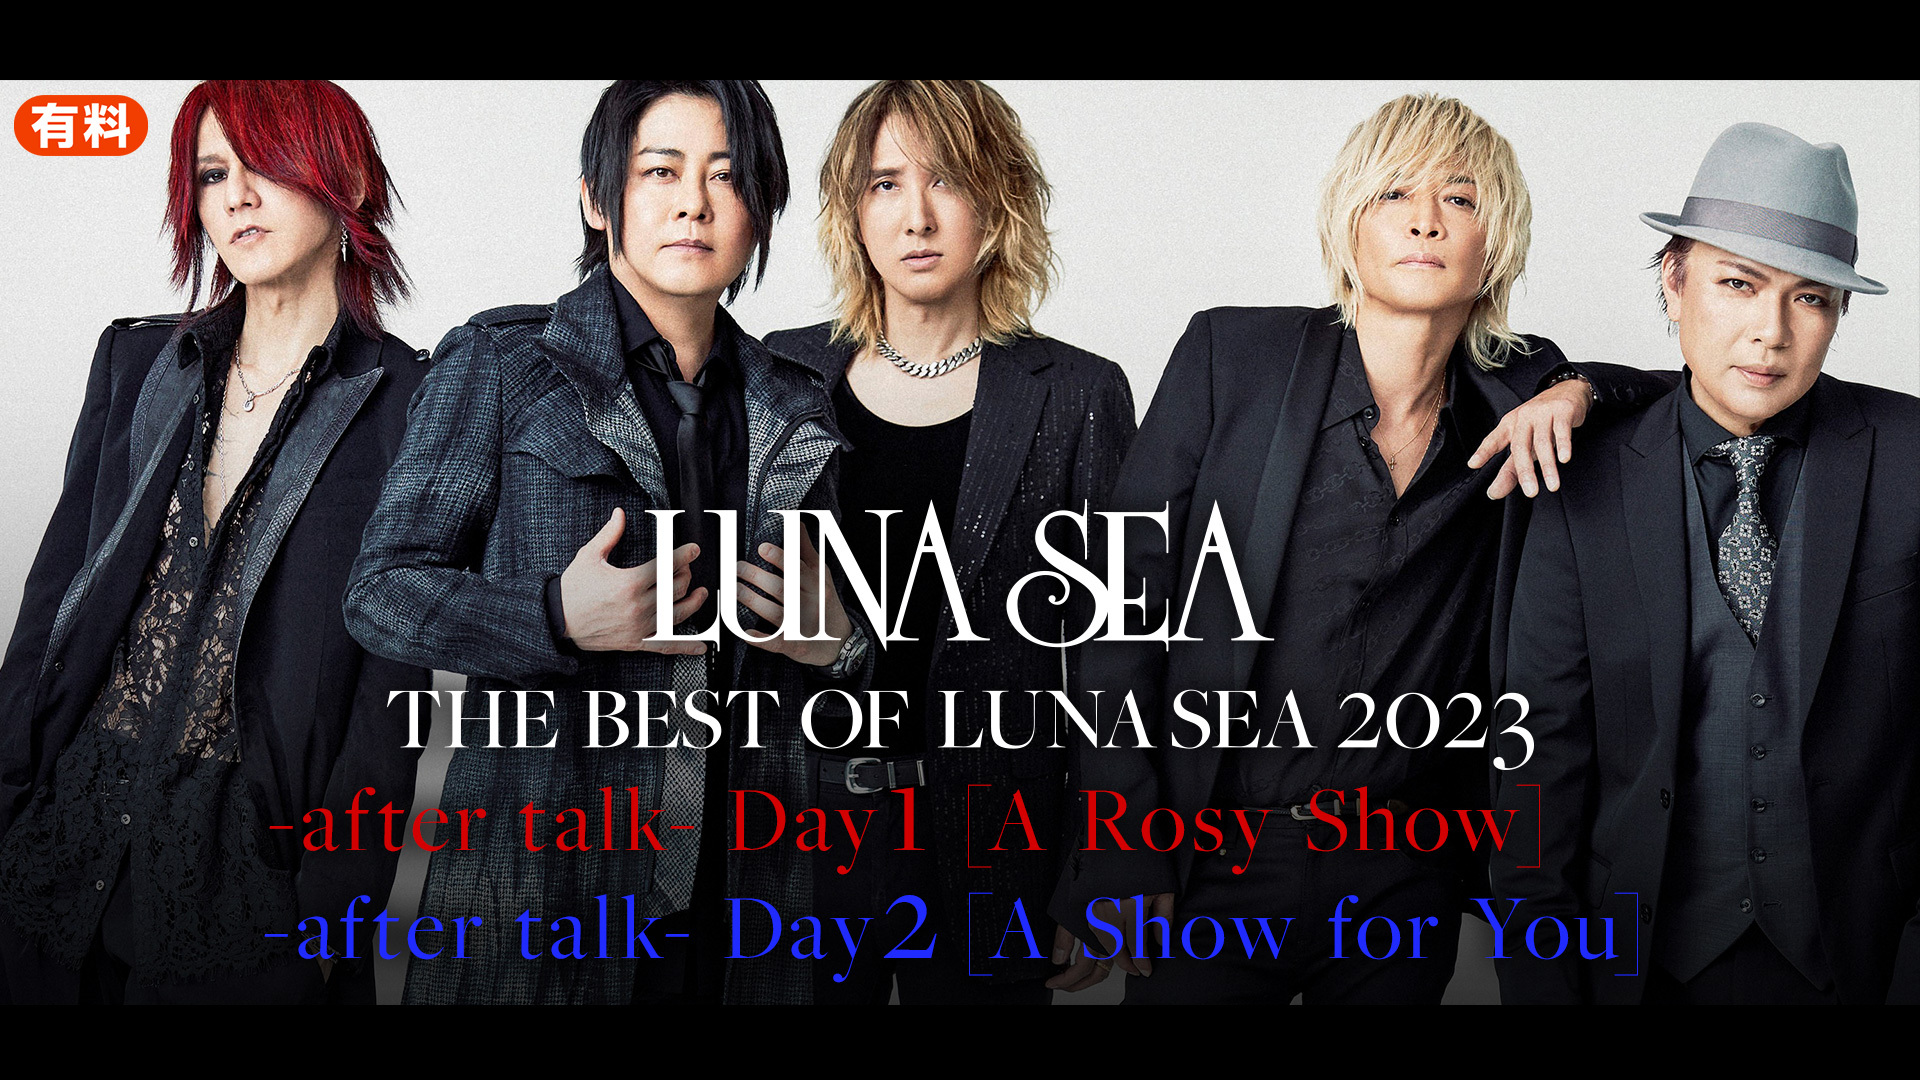 THE BEST OF LUNA SEA 2023 -after talk-